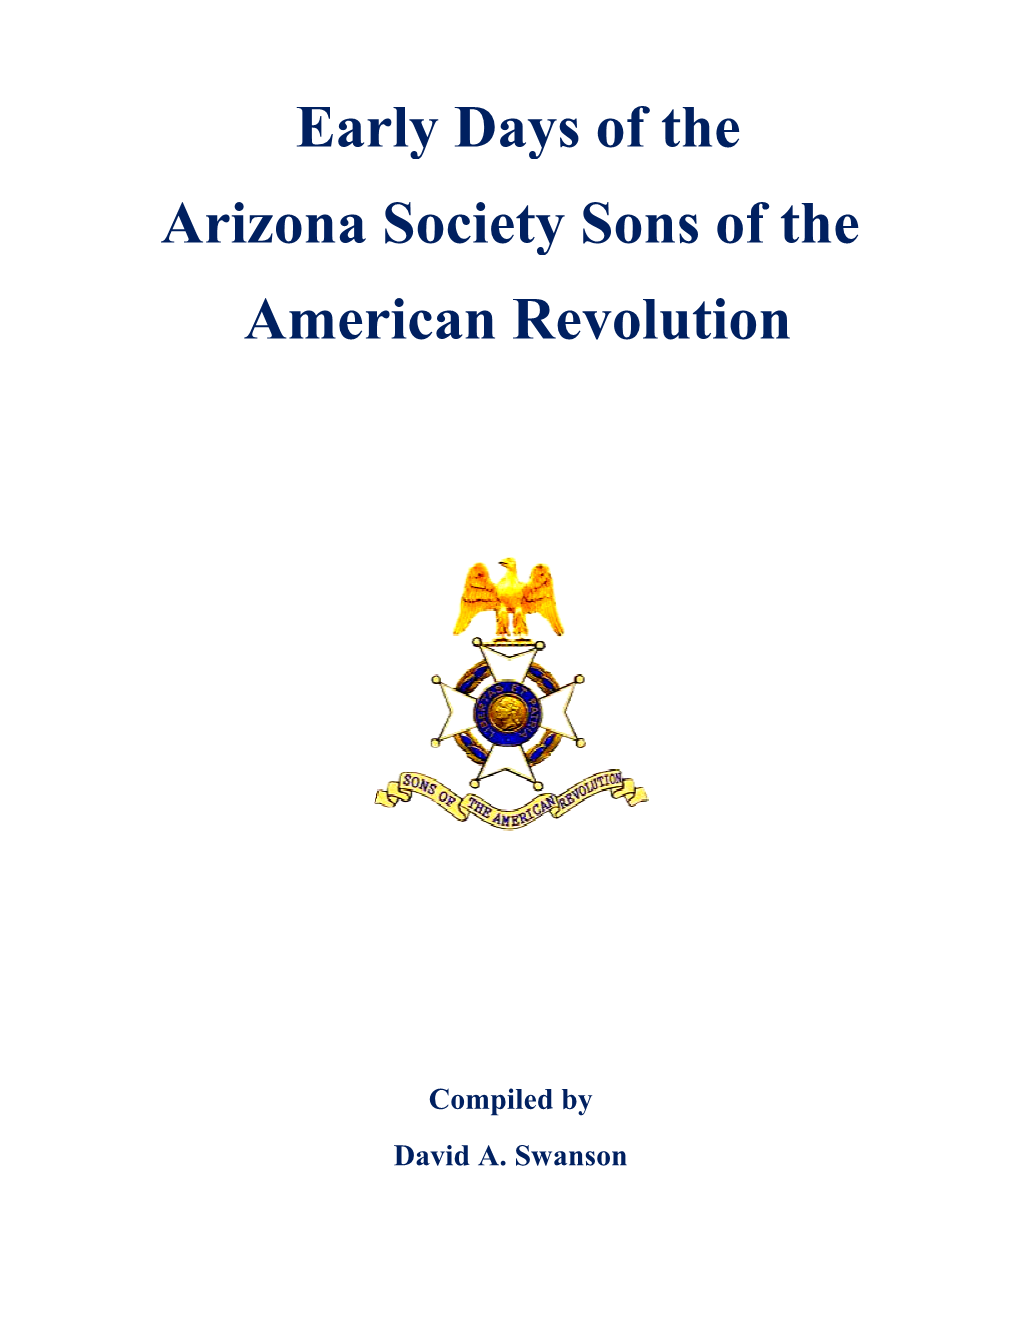 Early Days of the Arizona Society Sons of the American Revolution